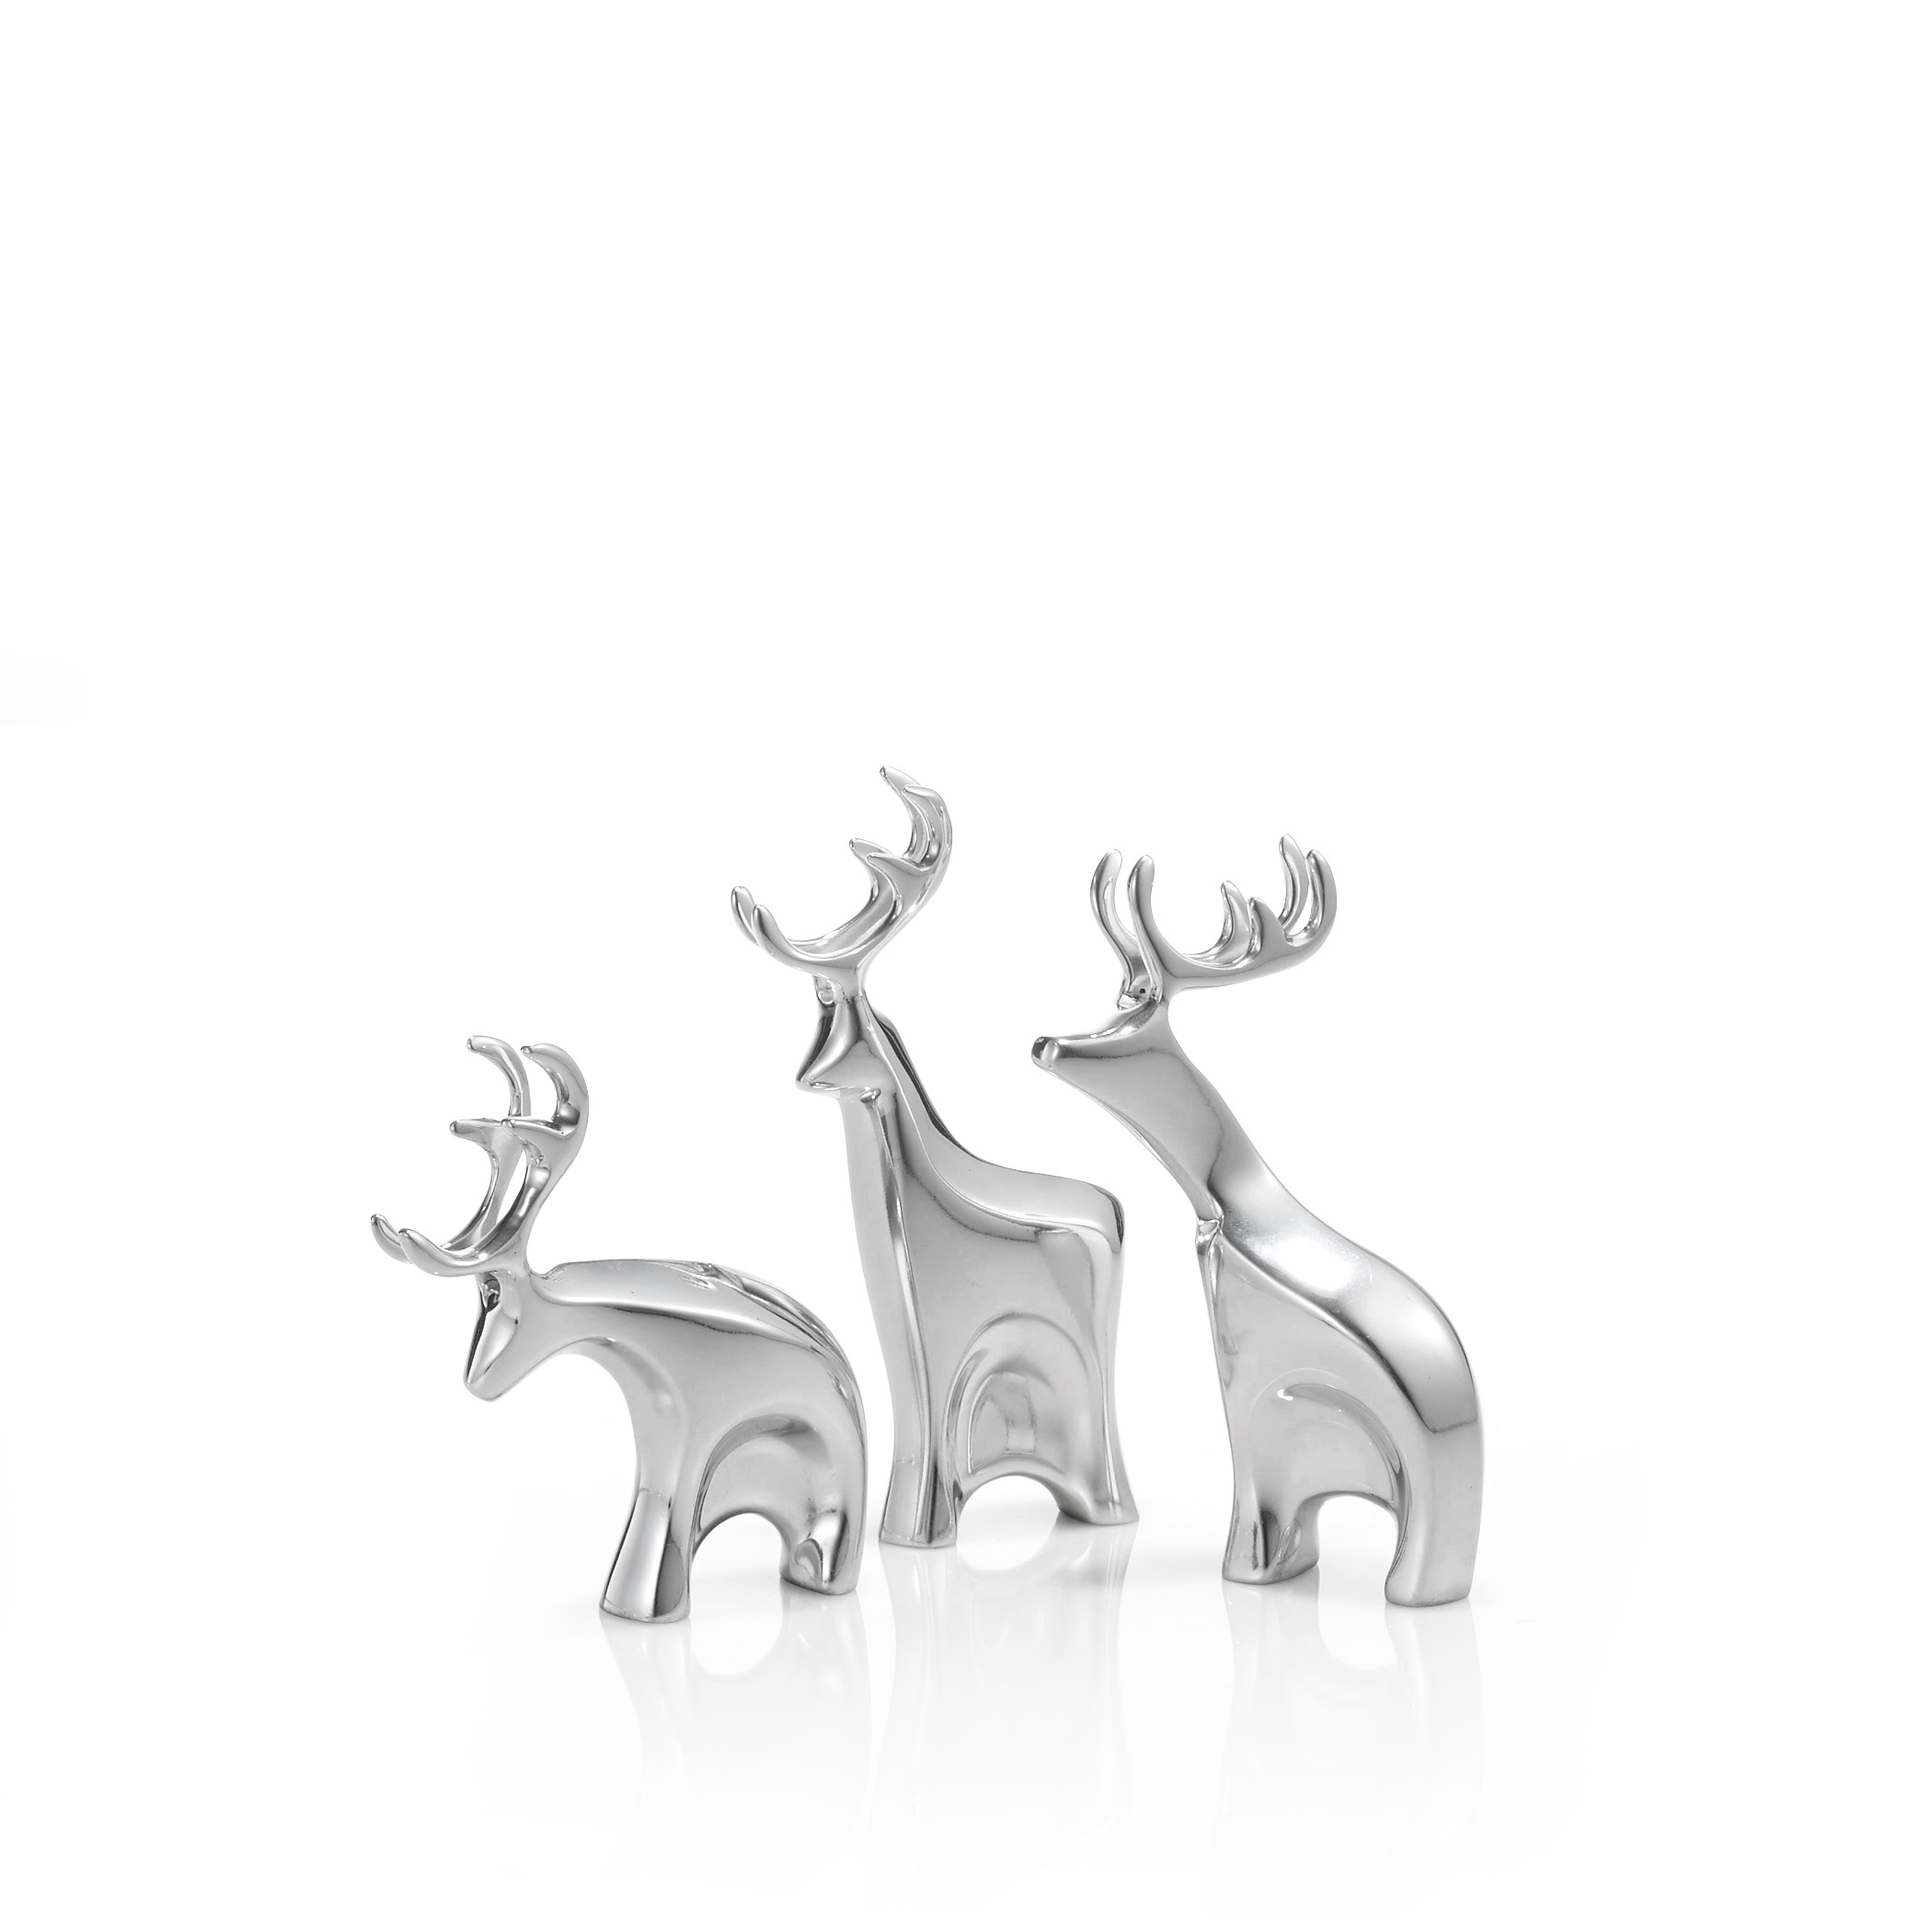 miniature-dasher-reindeer-set-designed-by-todd-myers-nambe